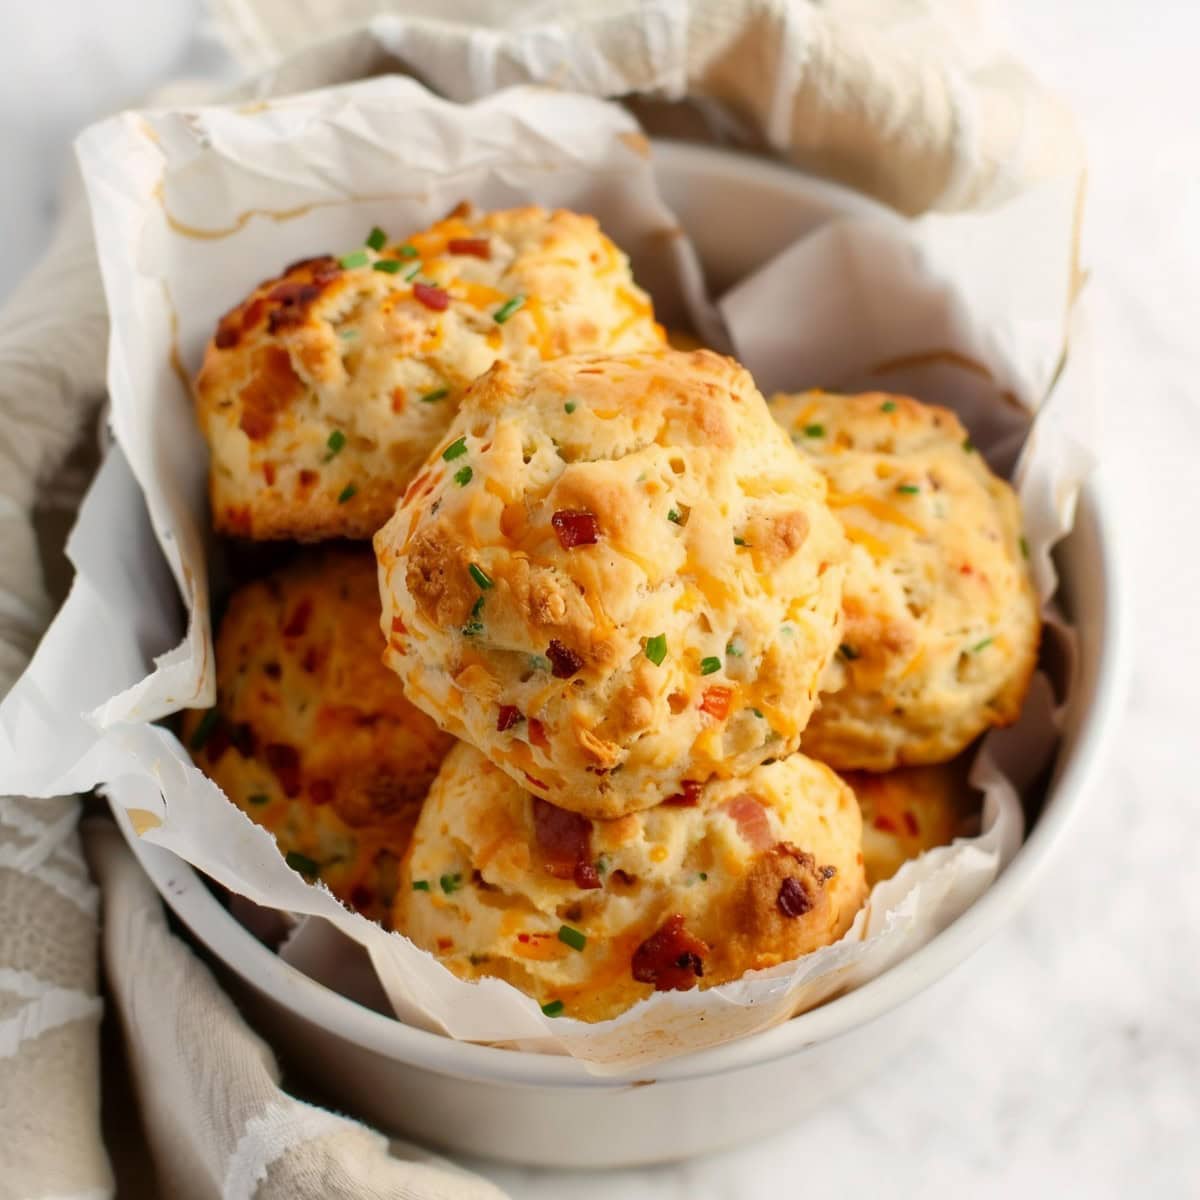 Bacon, cheese and chives biscuits, with crispy edges and a soft, fluffy interior